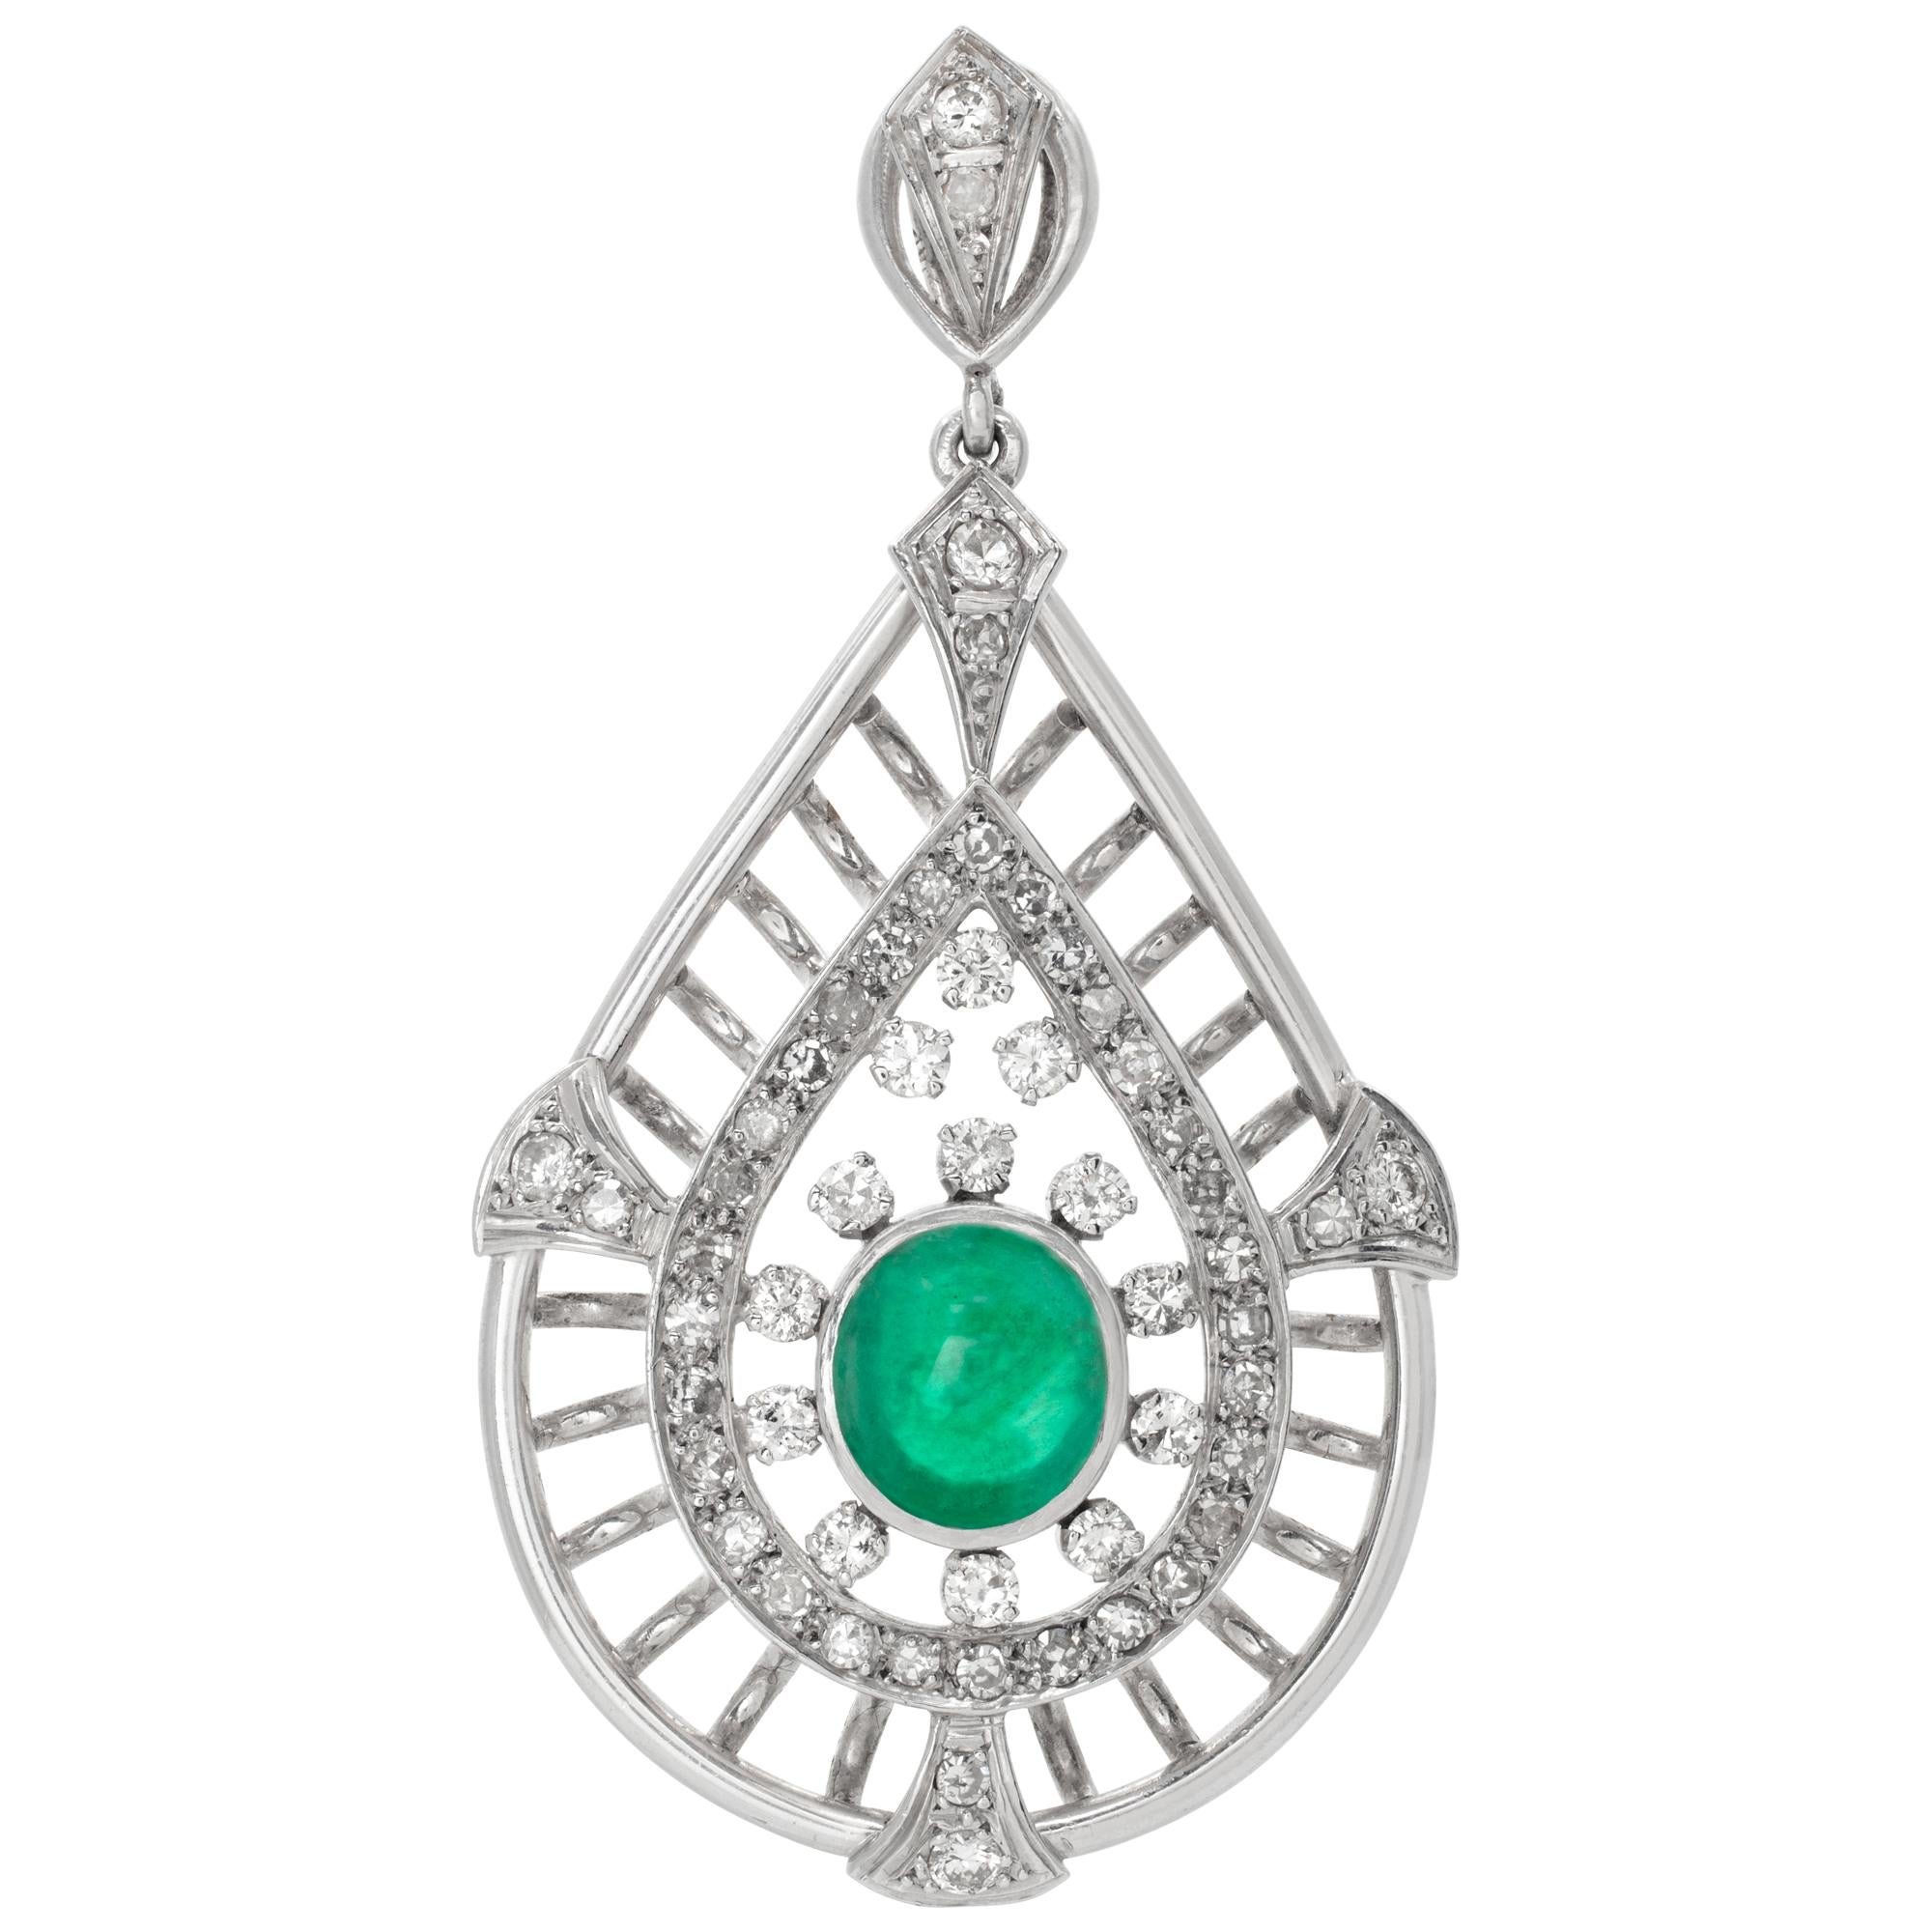 White gold tear drop brooch with center cabochon emerald and accent diamonds For Sale